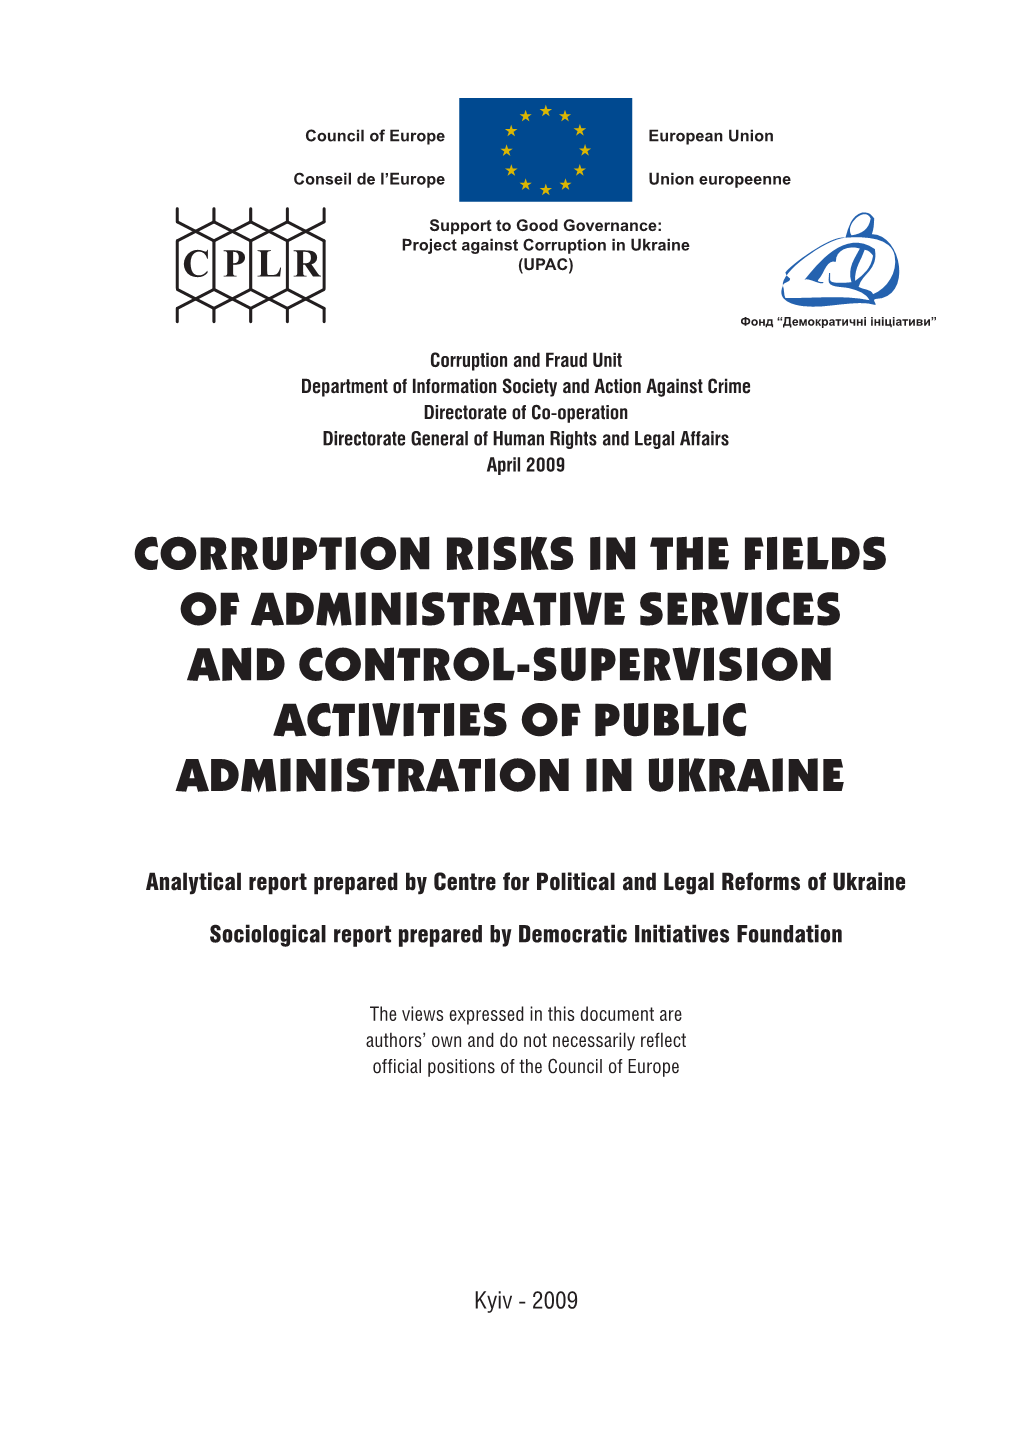 Corruption Risks in the Fields of Administrative Services and Control-Supervision Activities of Public Administration in Ukraine